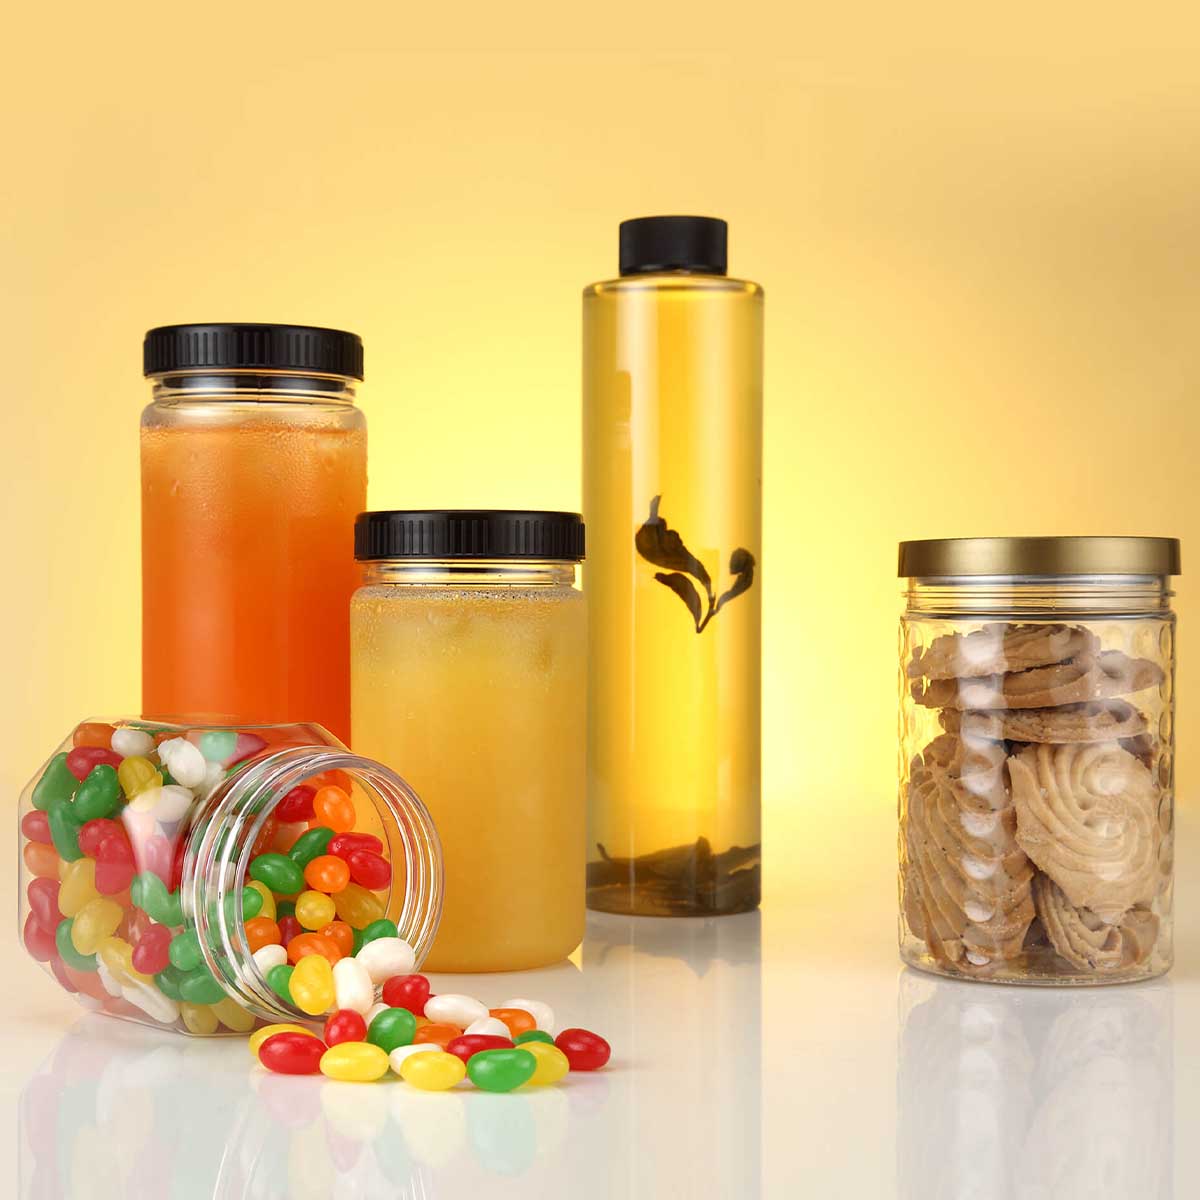 Recommended food packaging materials